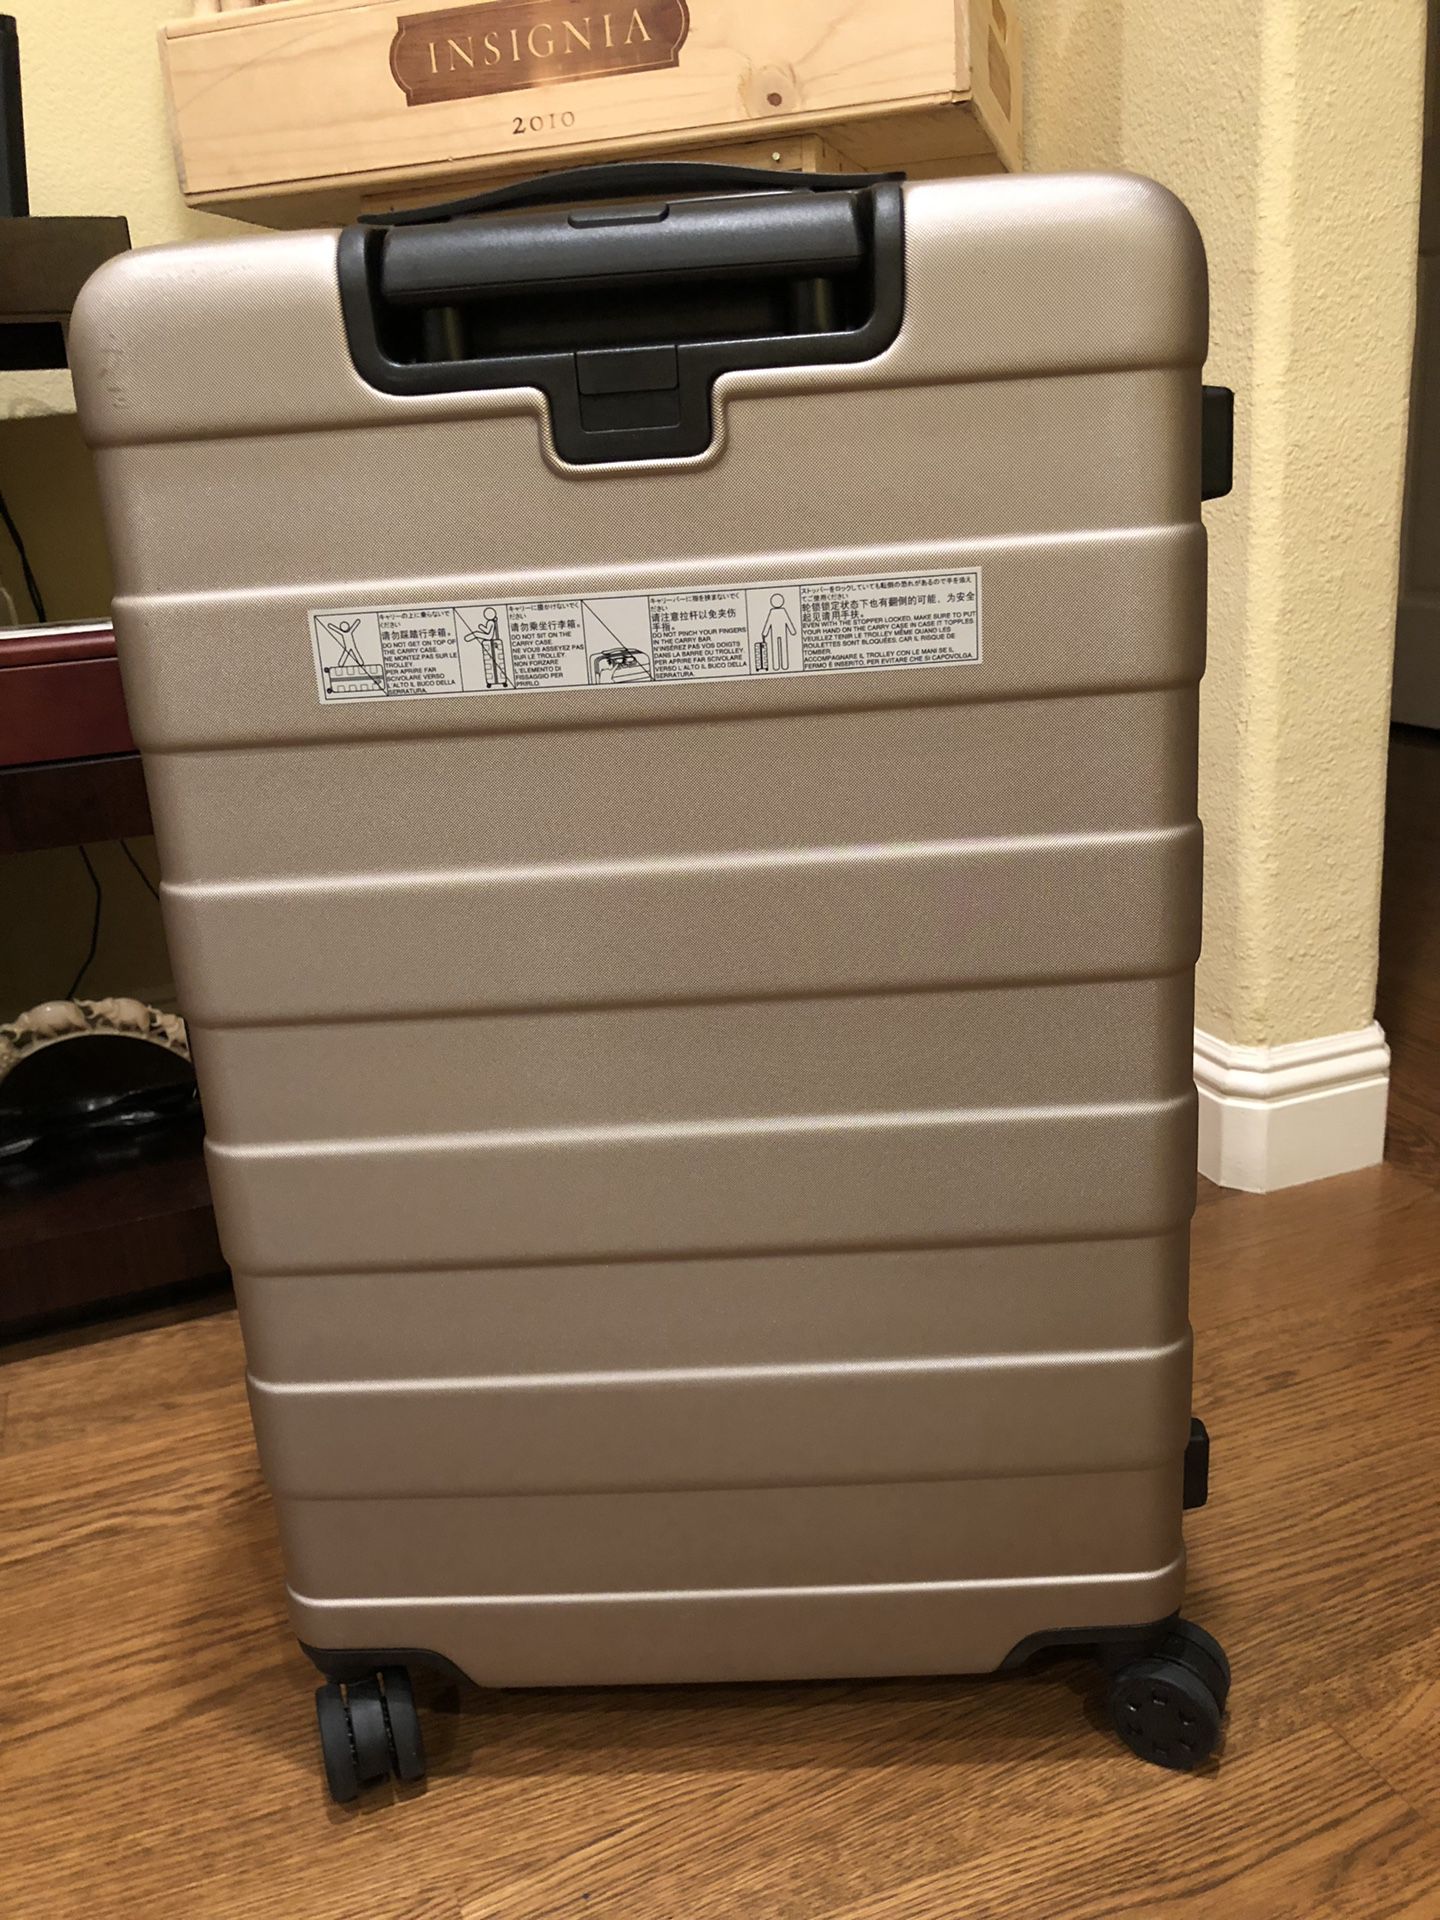 Away Luggage Carry On + Everywhere Bag Beige Sand Tan NEW With Boxes for  Sale in Tempe, AZ - OfferUp